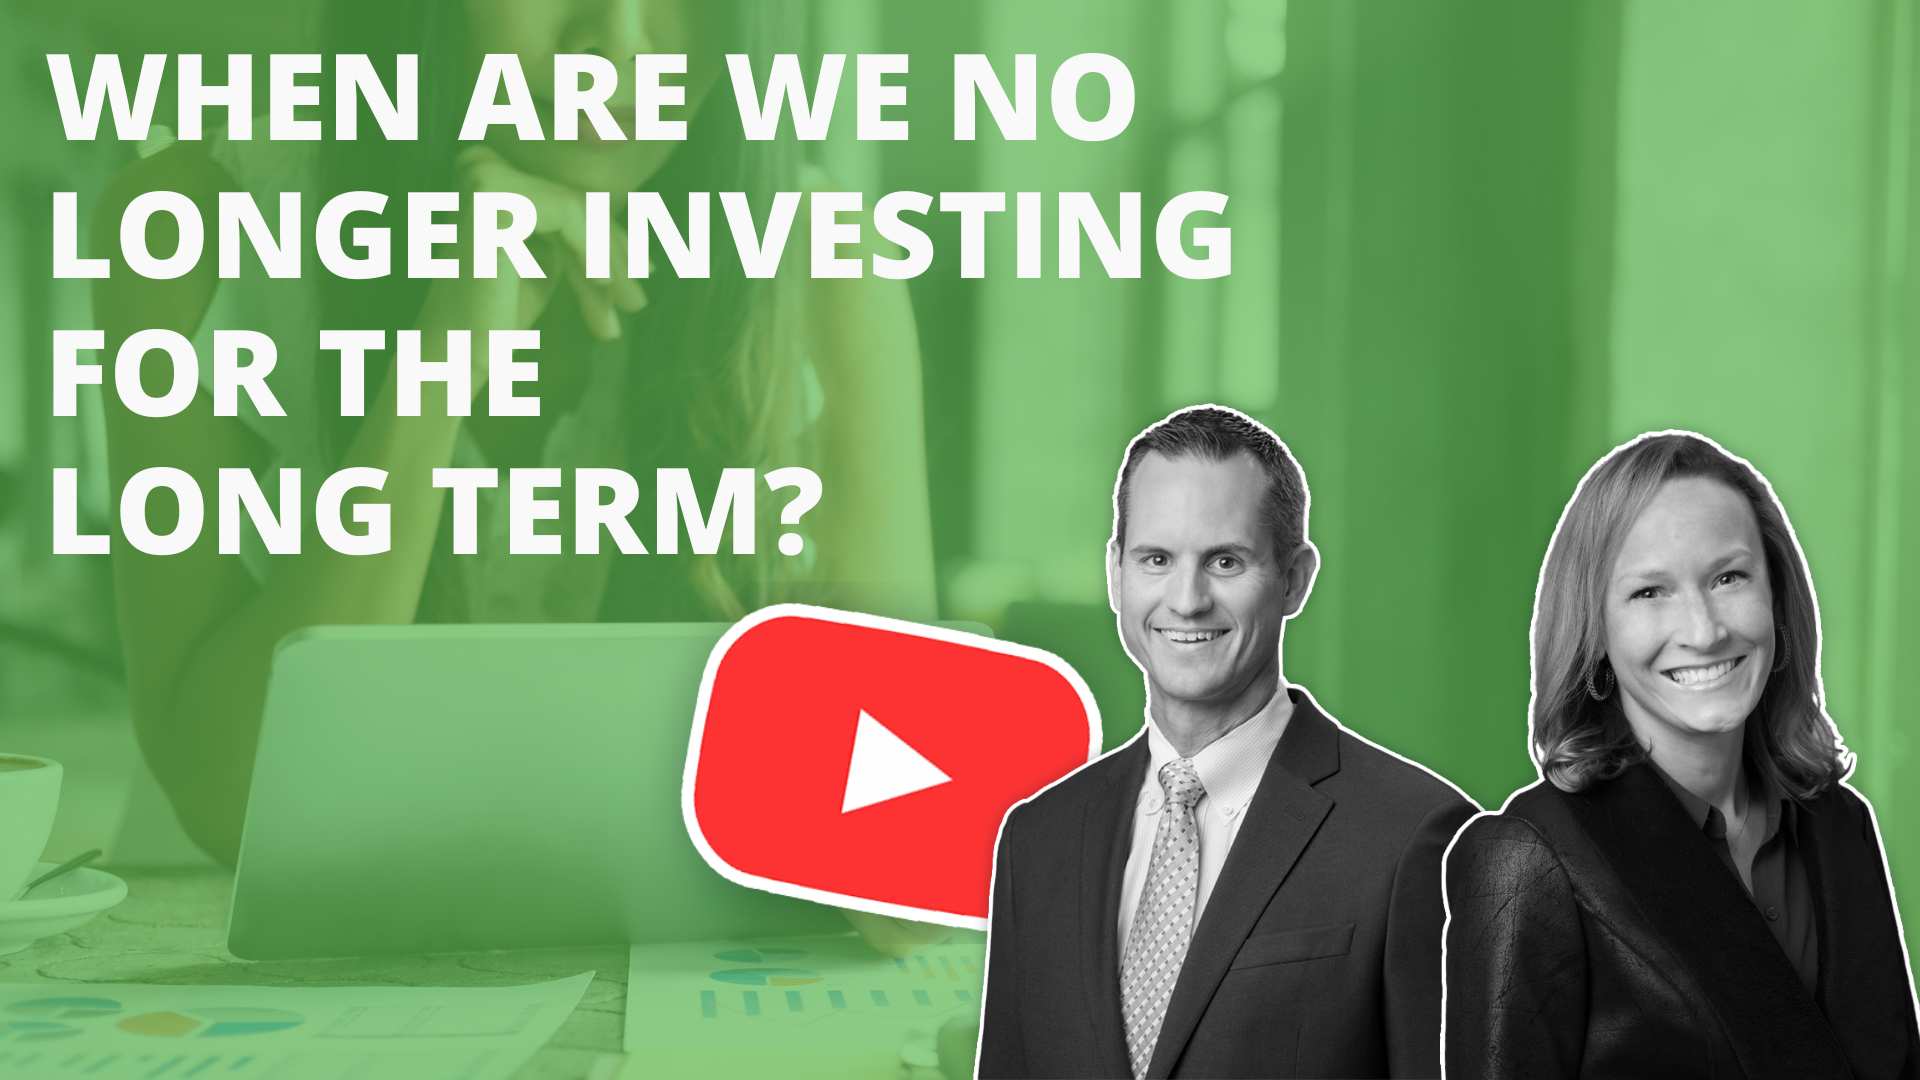 When are we no longer investing for the long term?